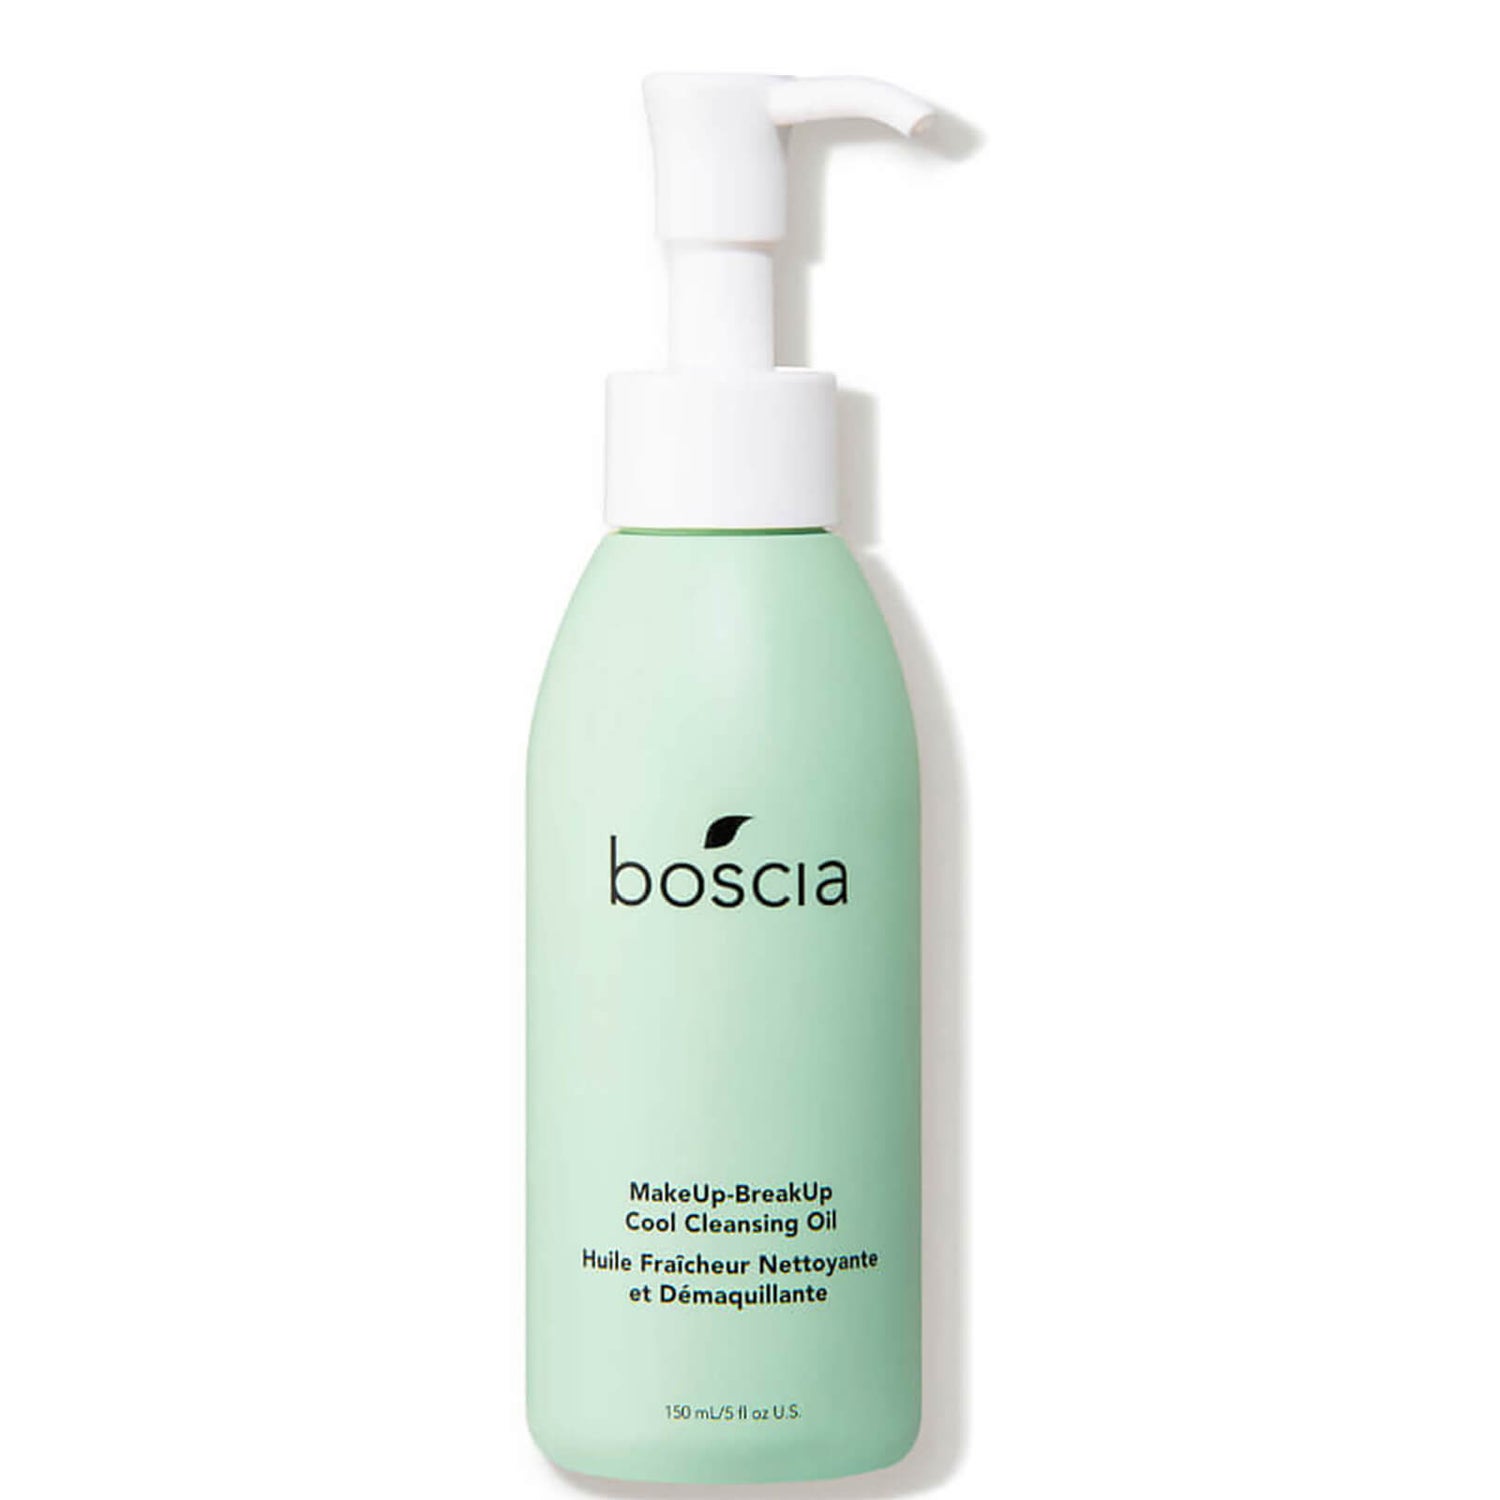 Boscia косметика. Make up Cleansing Oil. Make up Oil Cleanser. Босция.